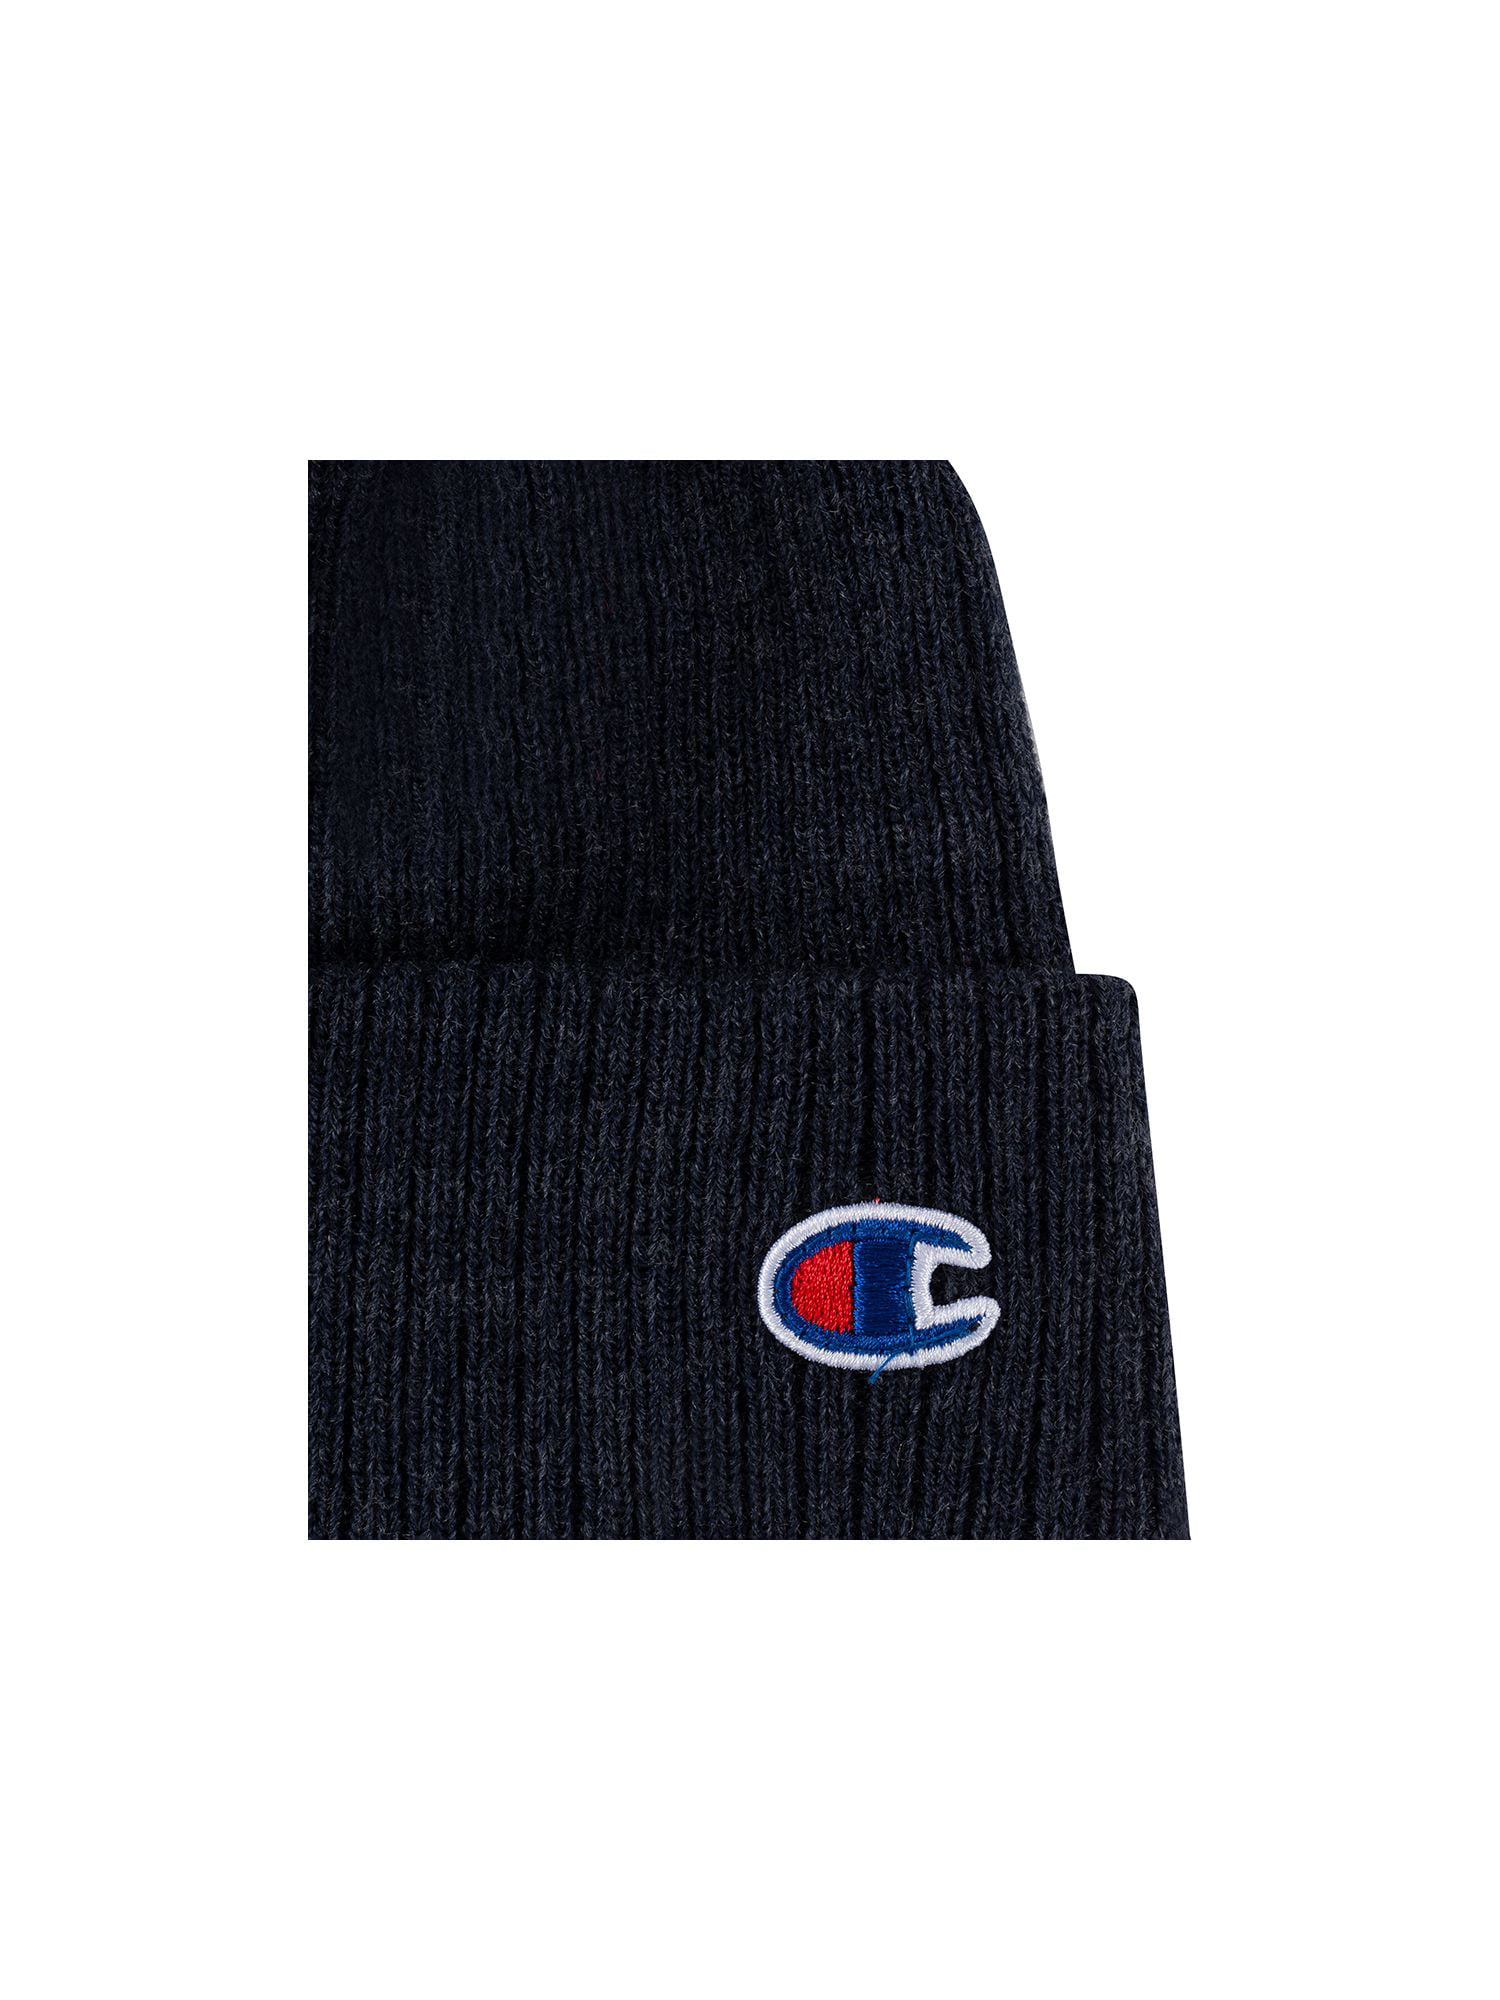 CHAMPION Ribbed Beanie Fitted Black Cap Acrylic Hat Logo Embroidered